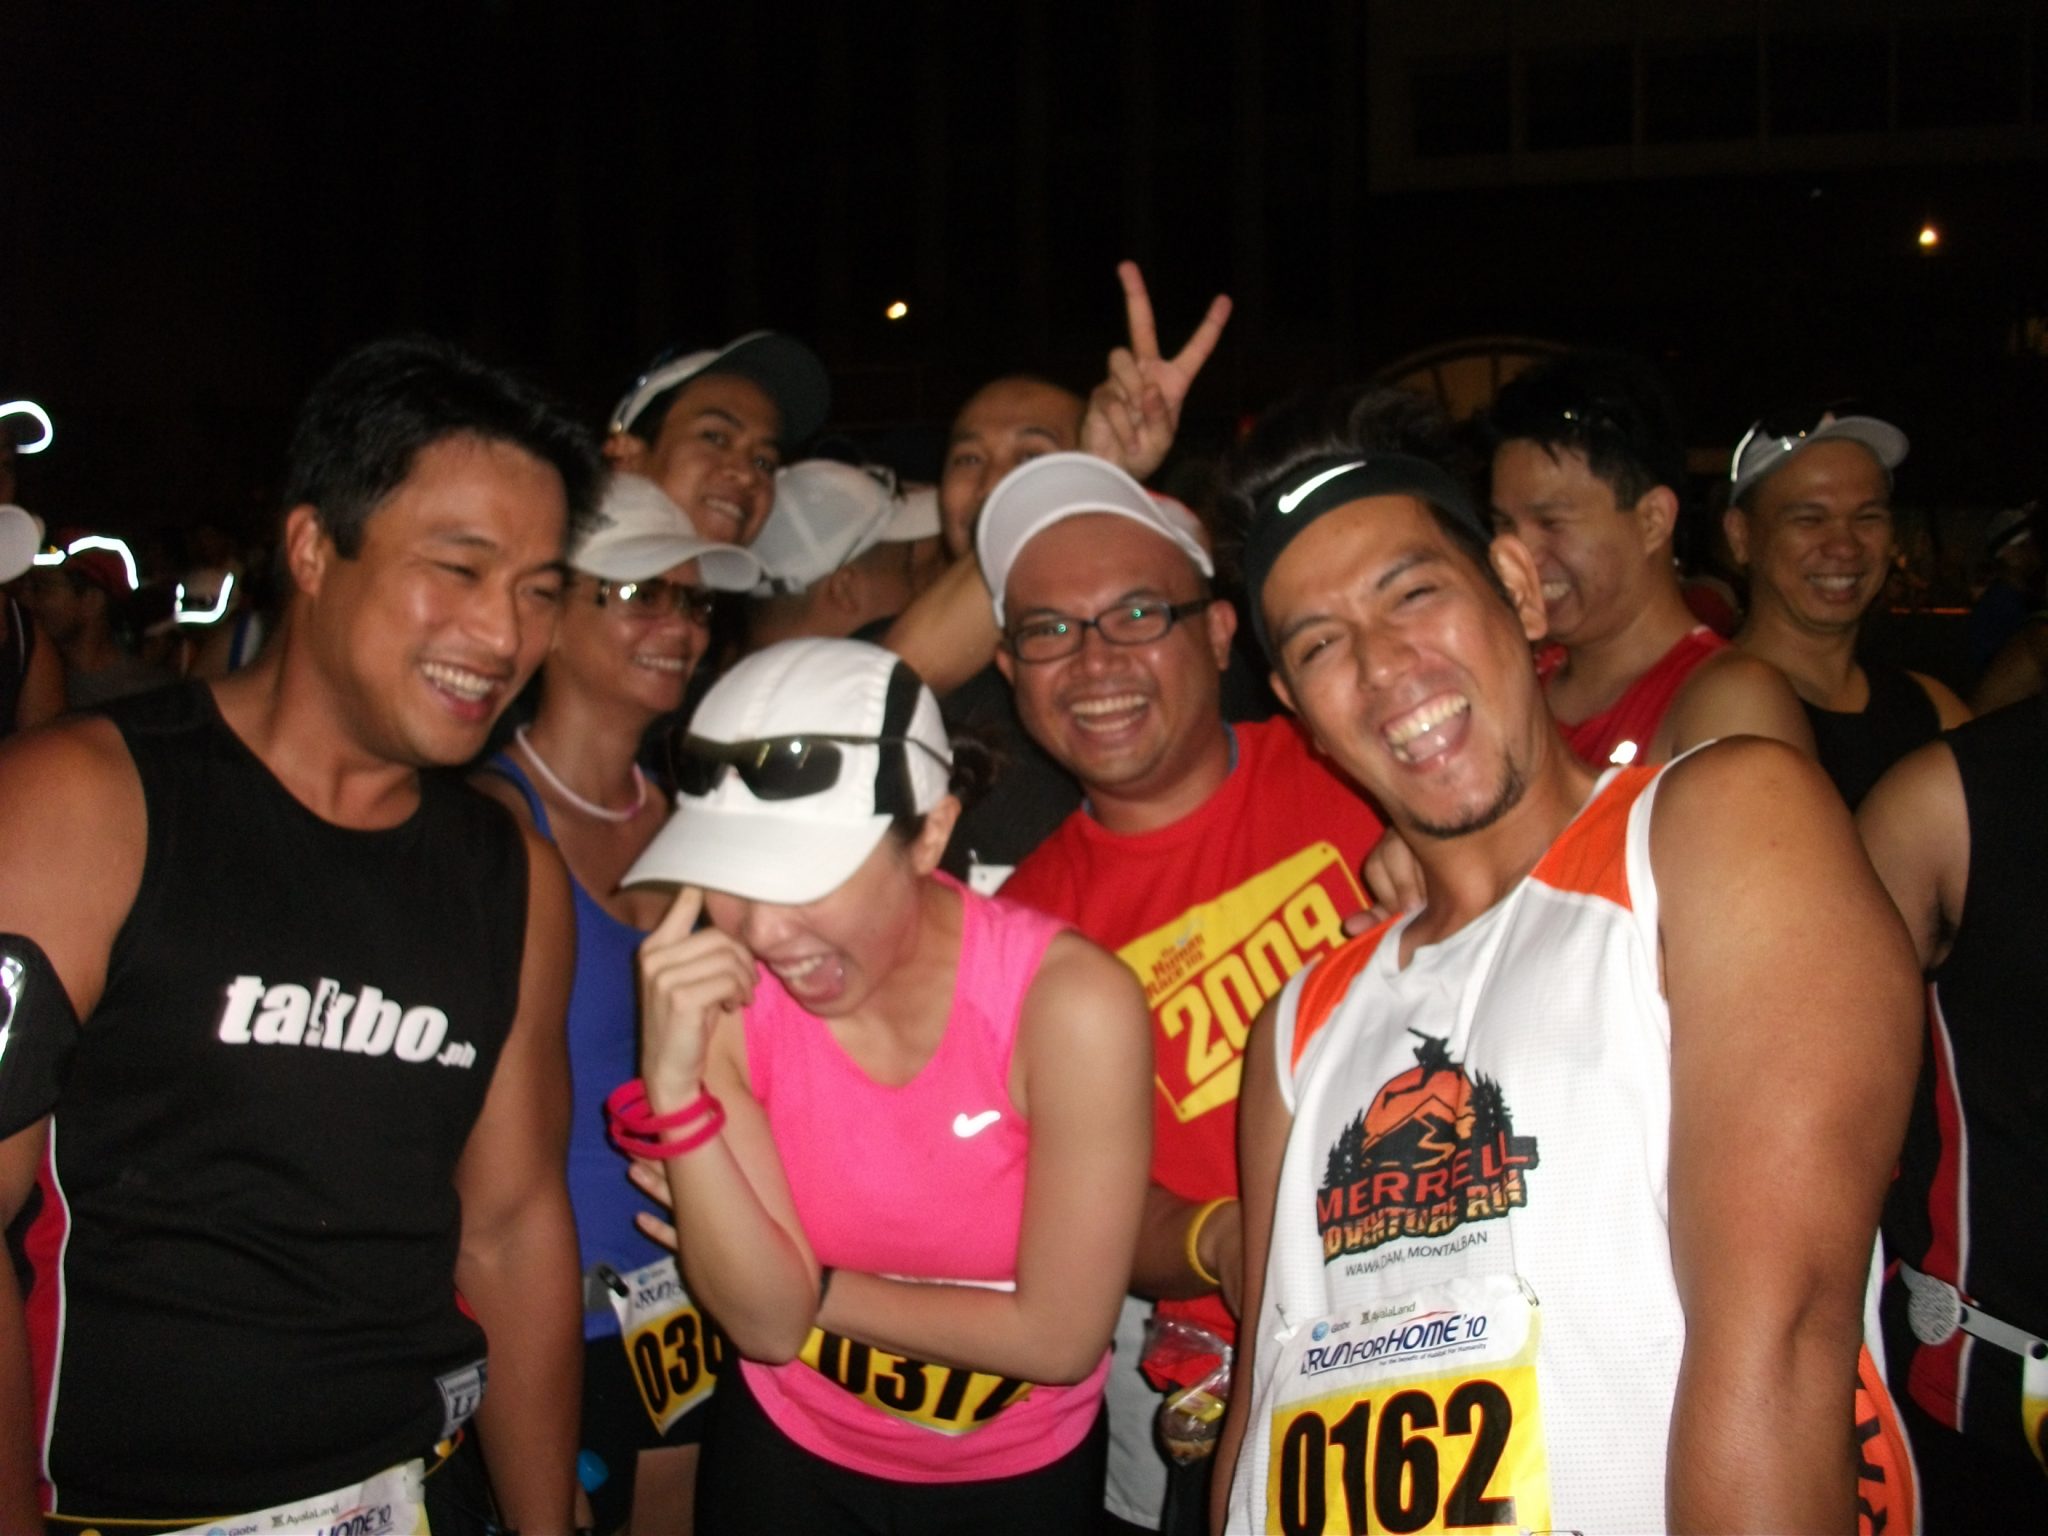 Globe Run For Home 2010: Hijinks at the Starting Line